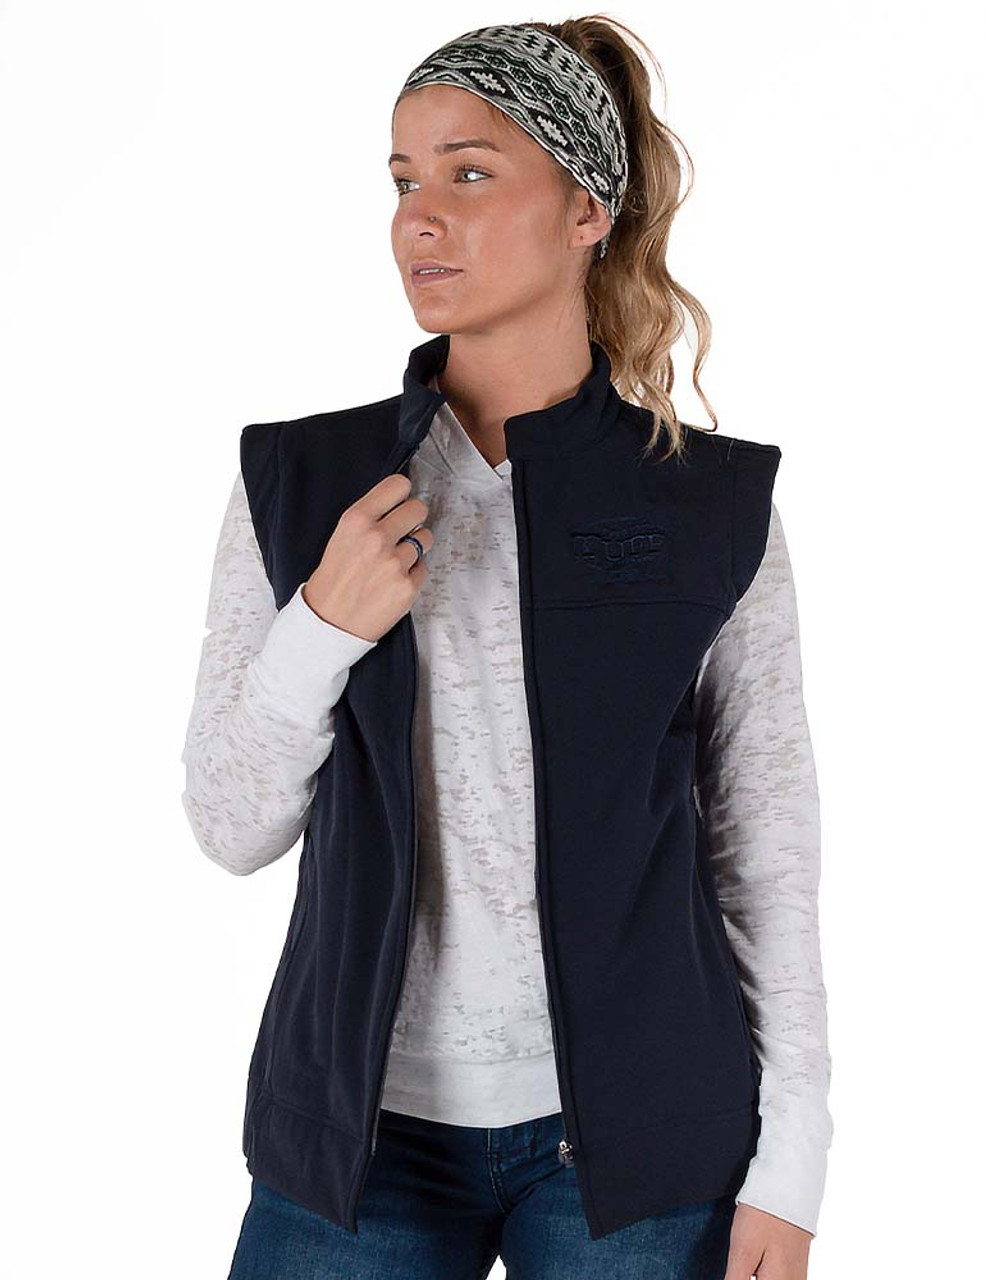 Stretch microfiber vest with embroidered logo (navy)